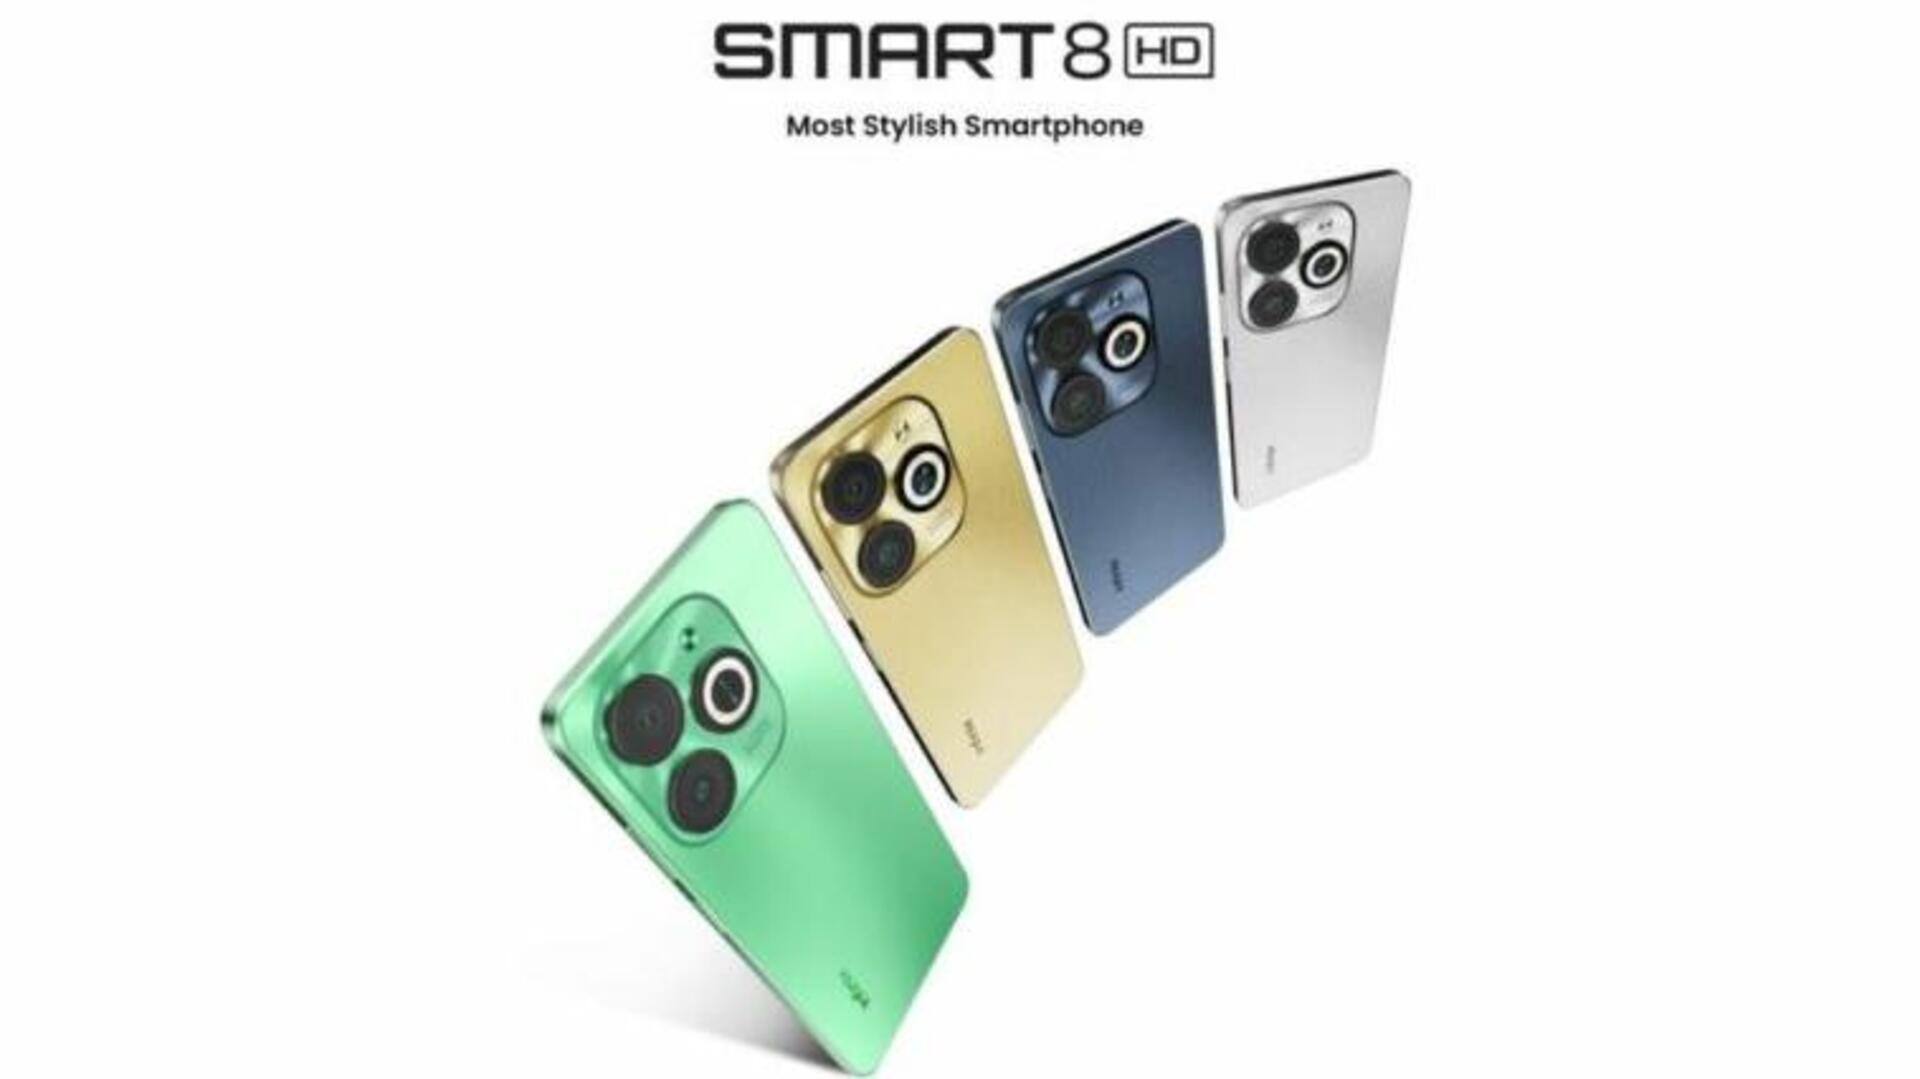 Infinix Smart 8HD to launch on December 8: Check features